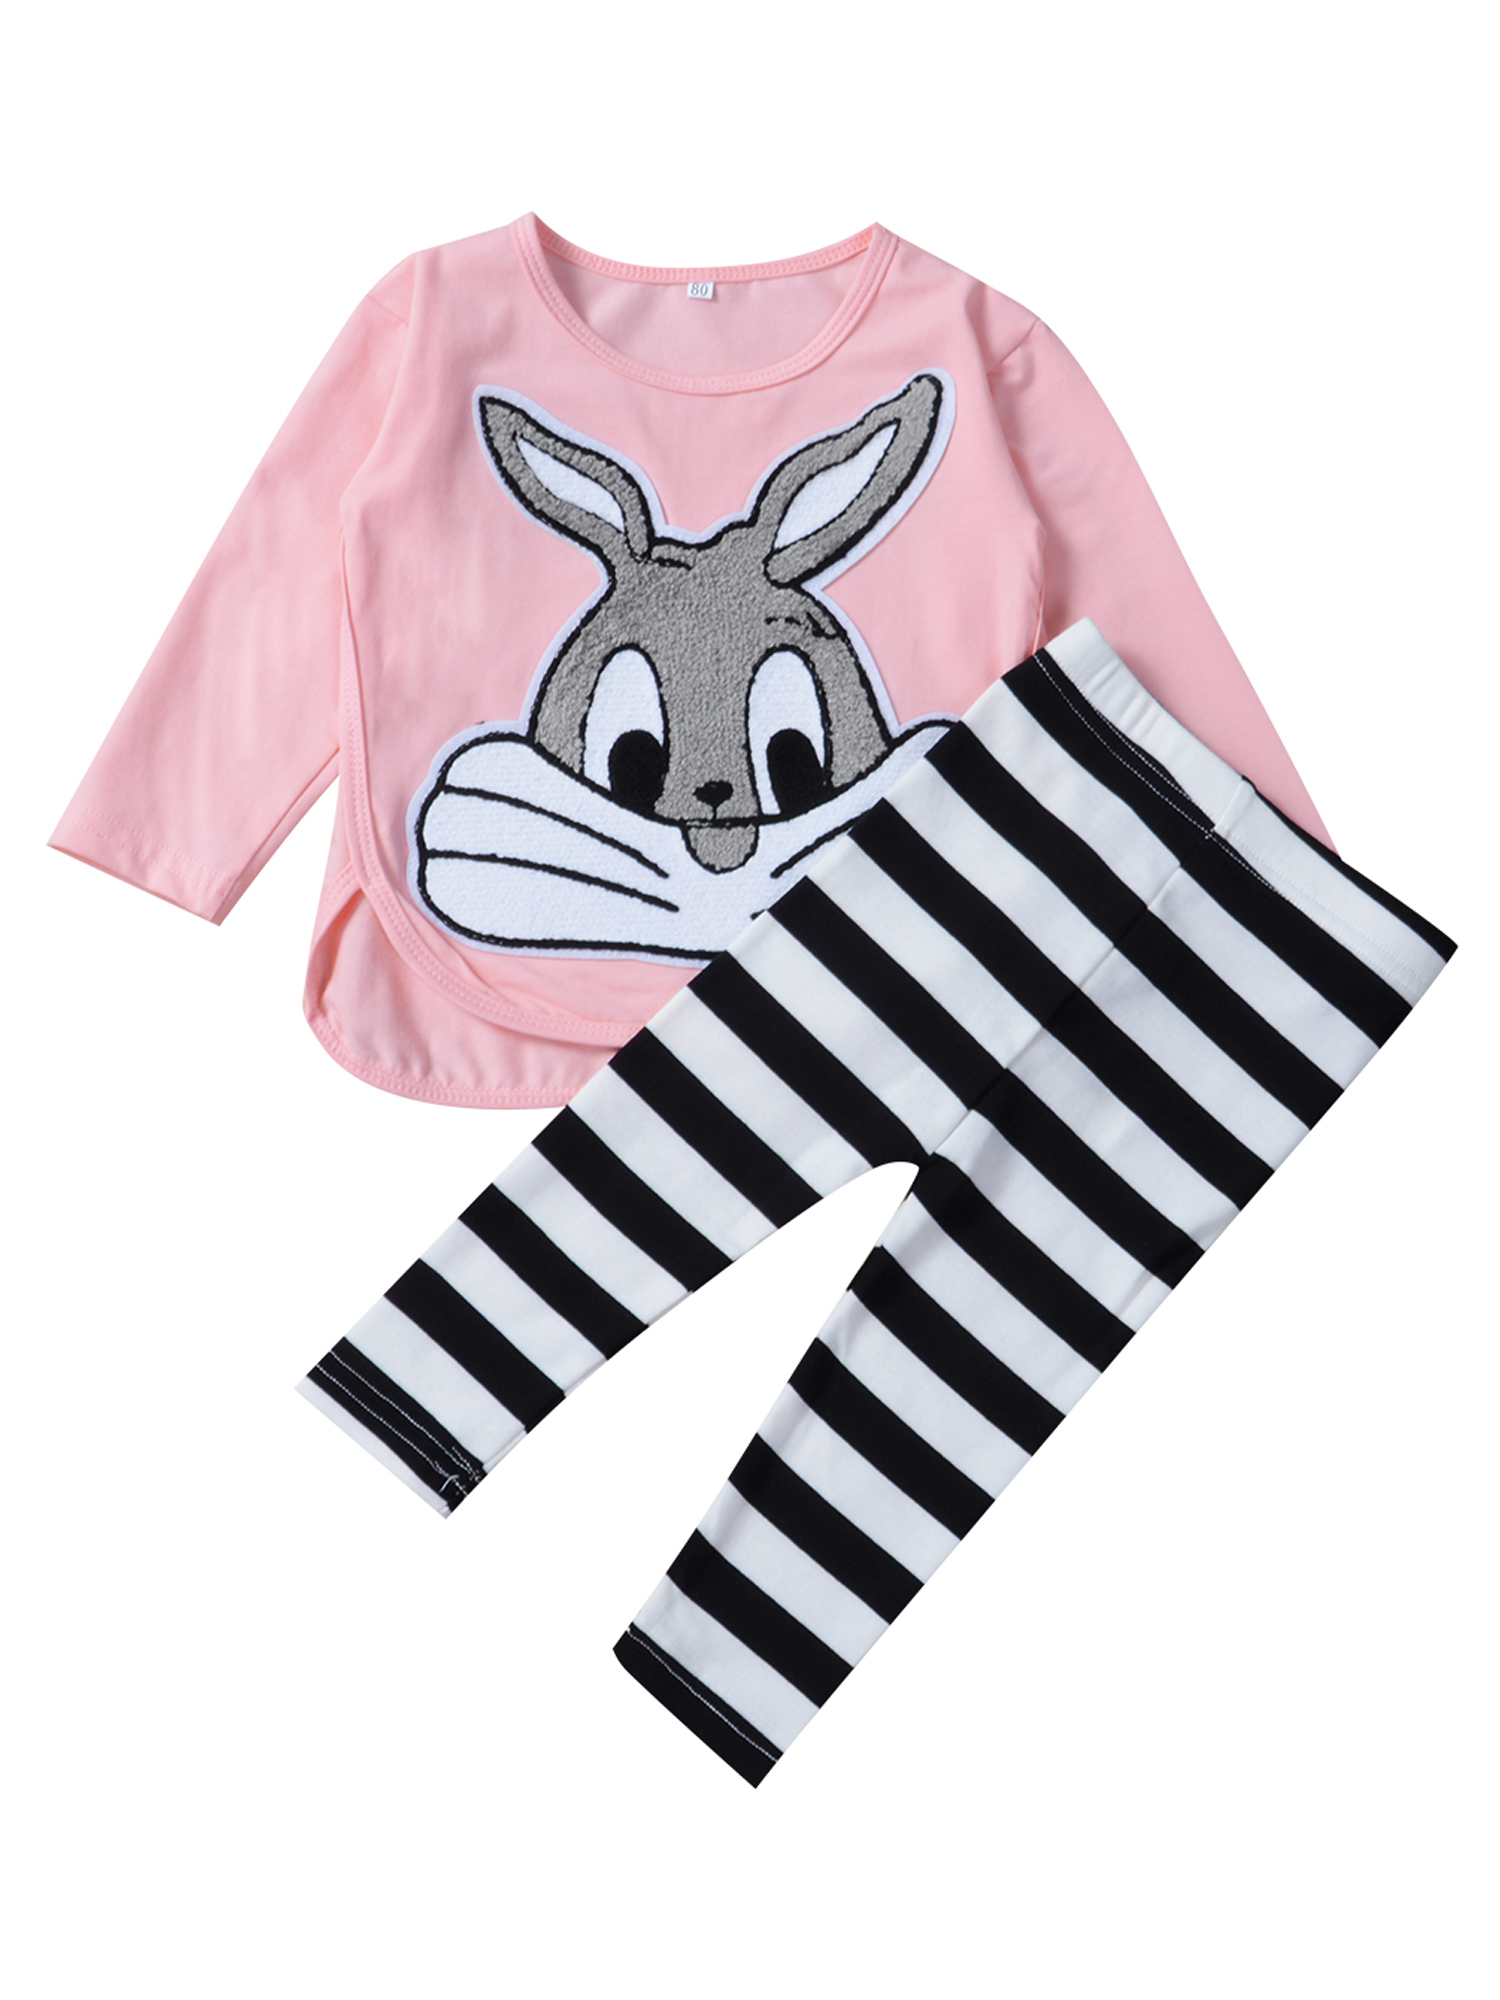 Toddler Girl Clothes Long Sleeves Shirt and Pants Outfit Toddler Girl Spring Fall Winter Clothing Set